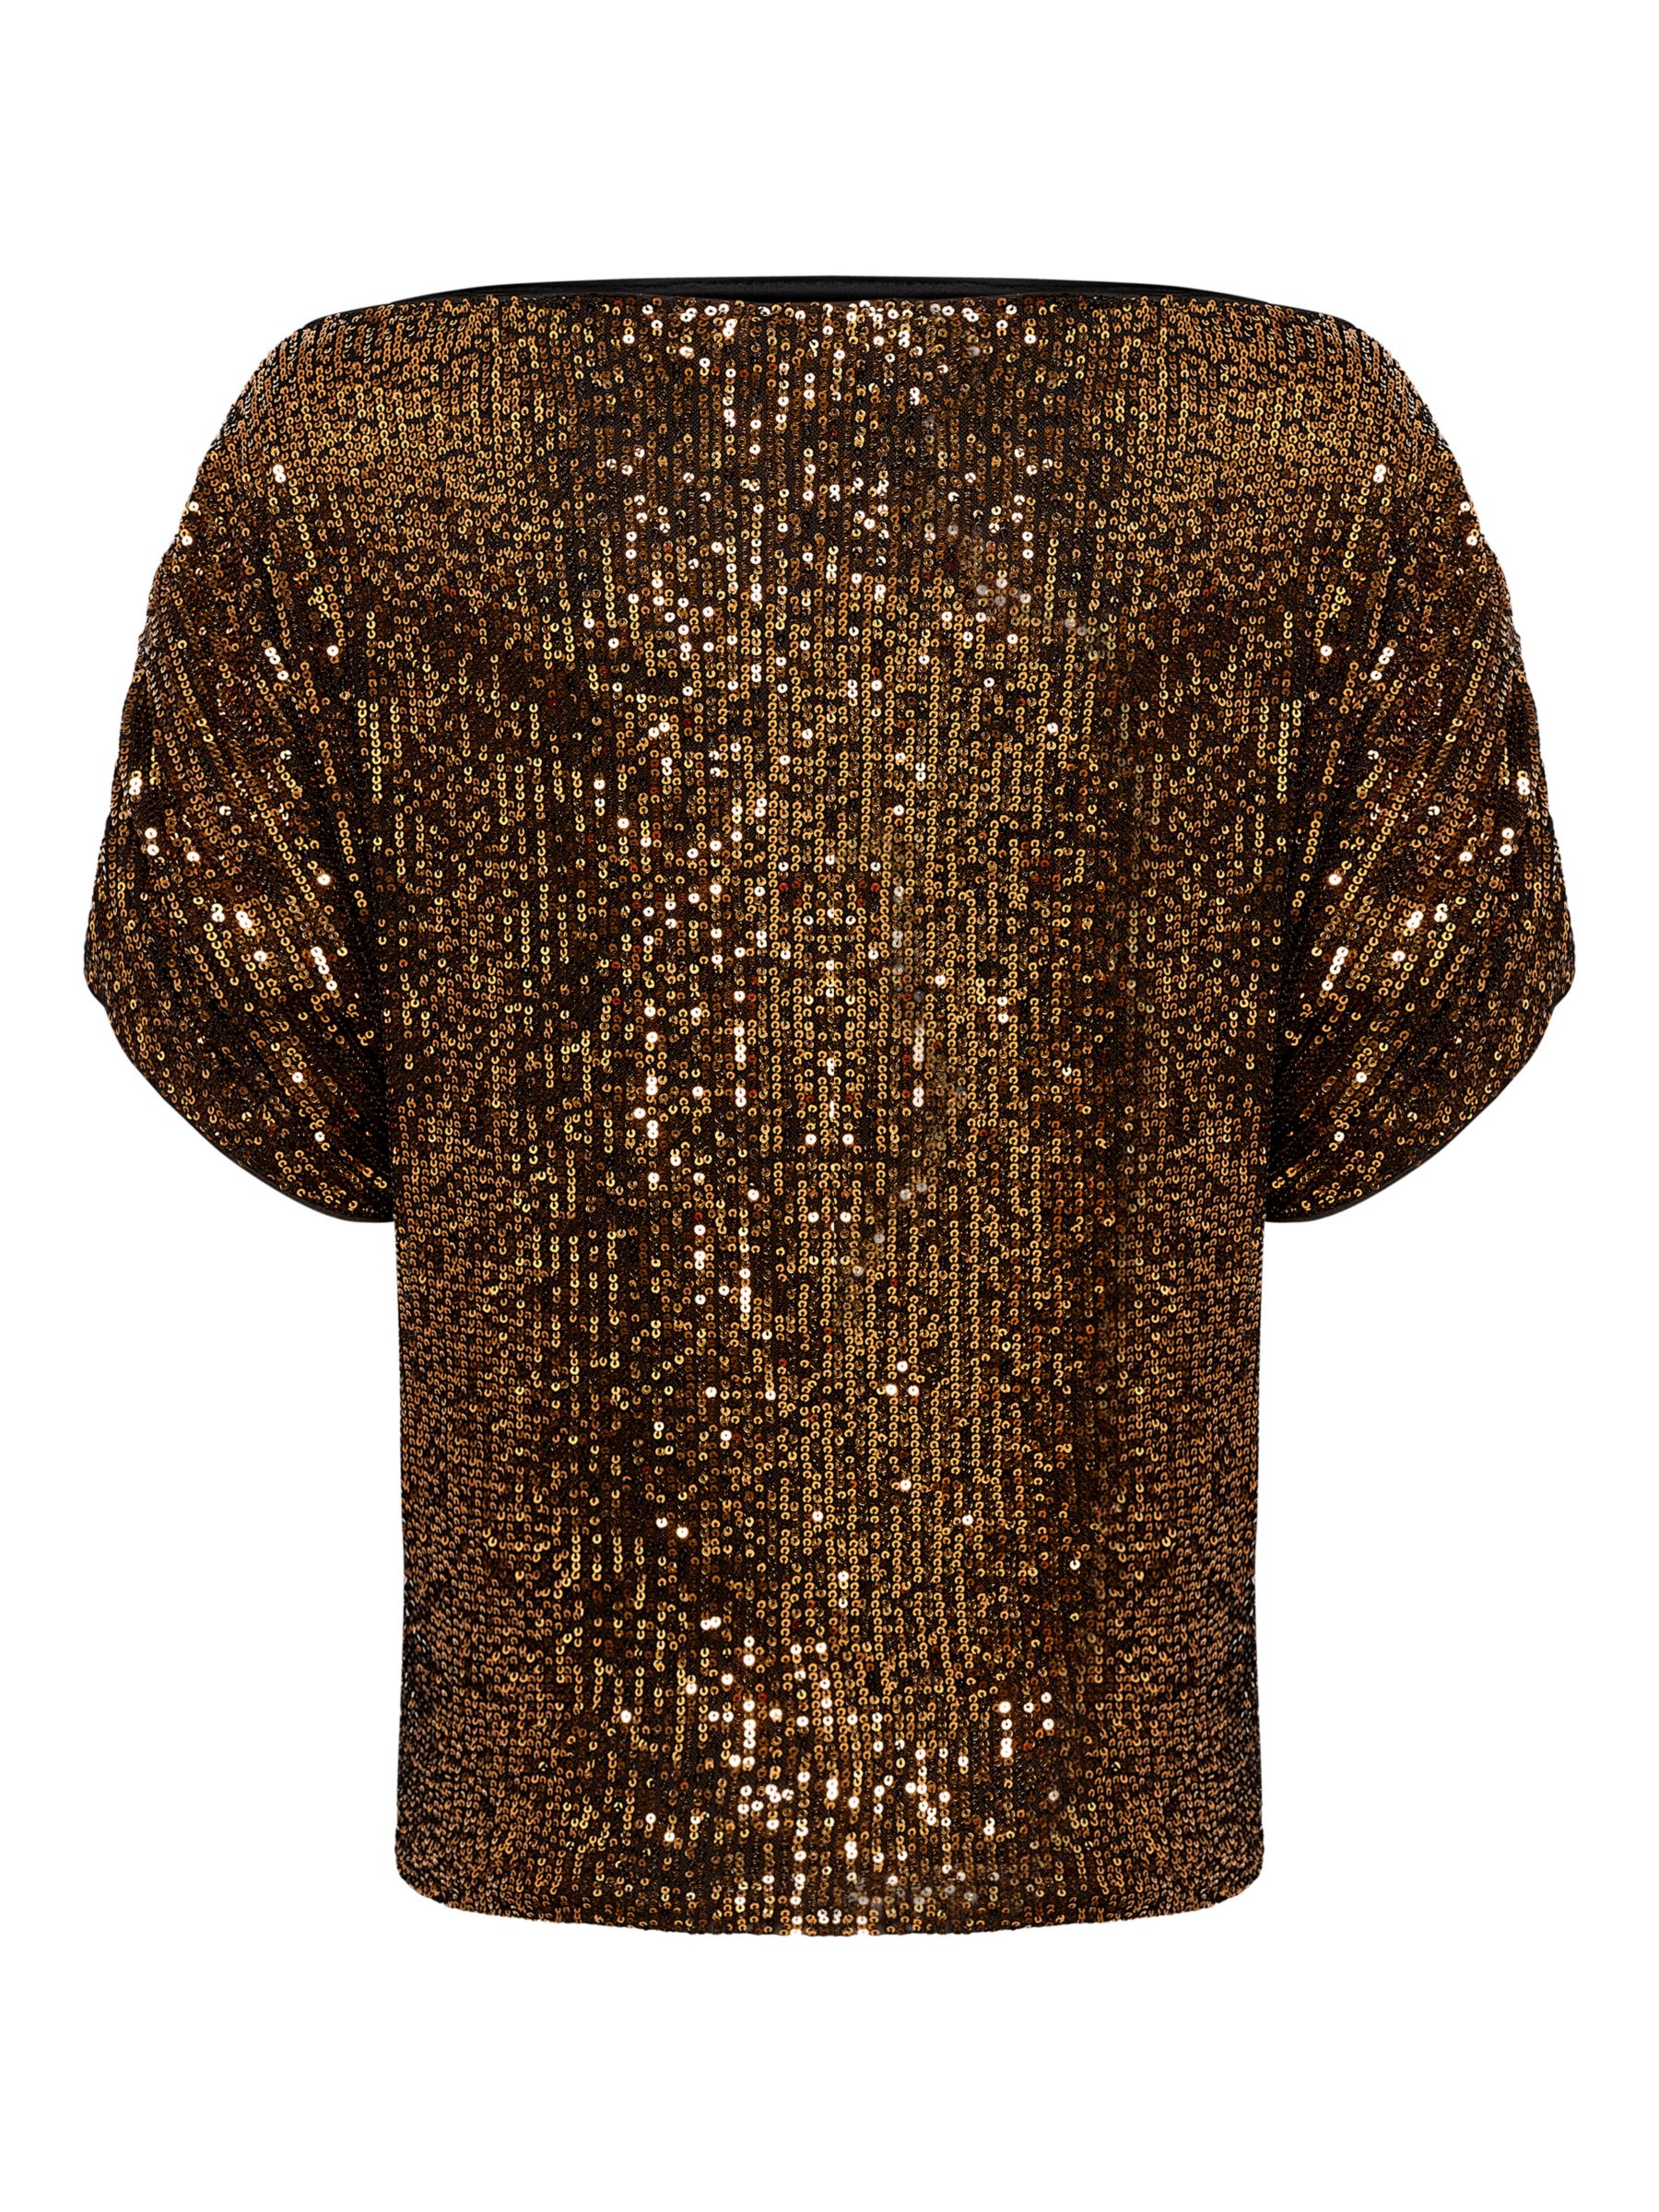 Soaked In Luxury Suse Asymmetrical Sleeve Sequin Top, Copper, L